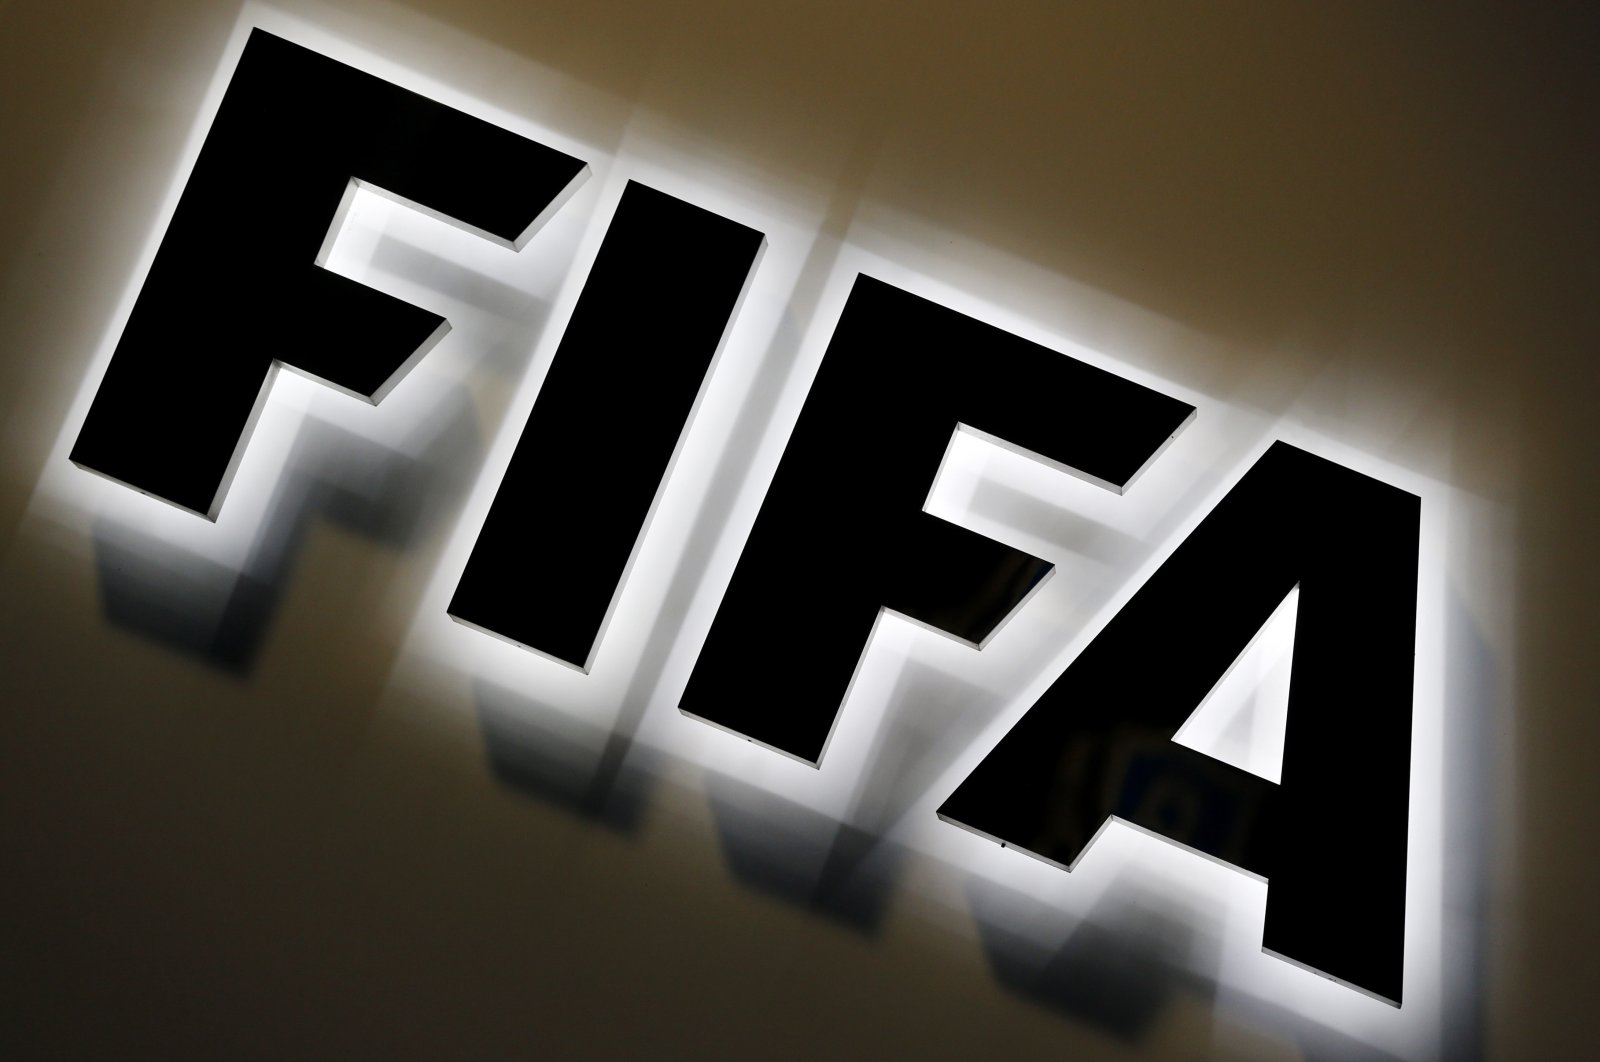 The FIFA logo is seen outside its headquarters in Zurich, Switzerland, Sept. 25, 2015. (AP Photo)